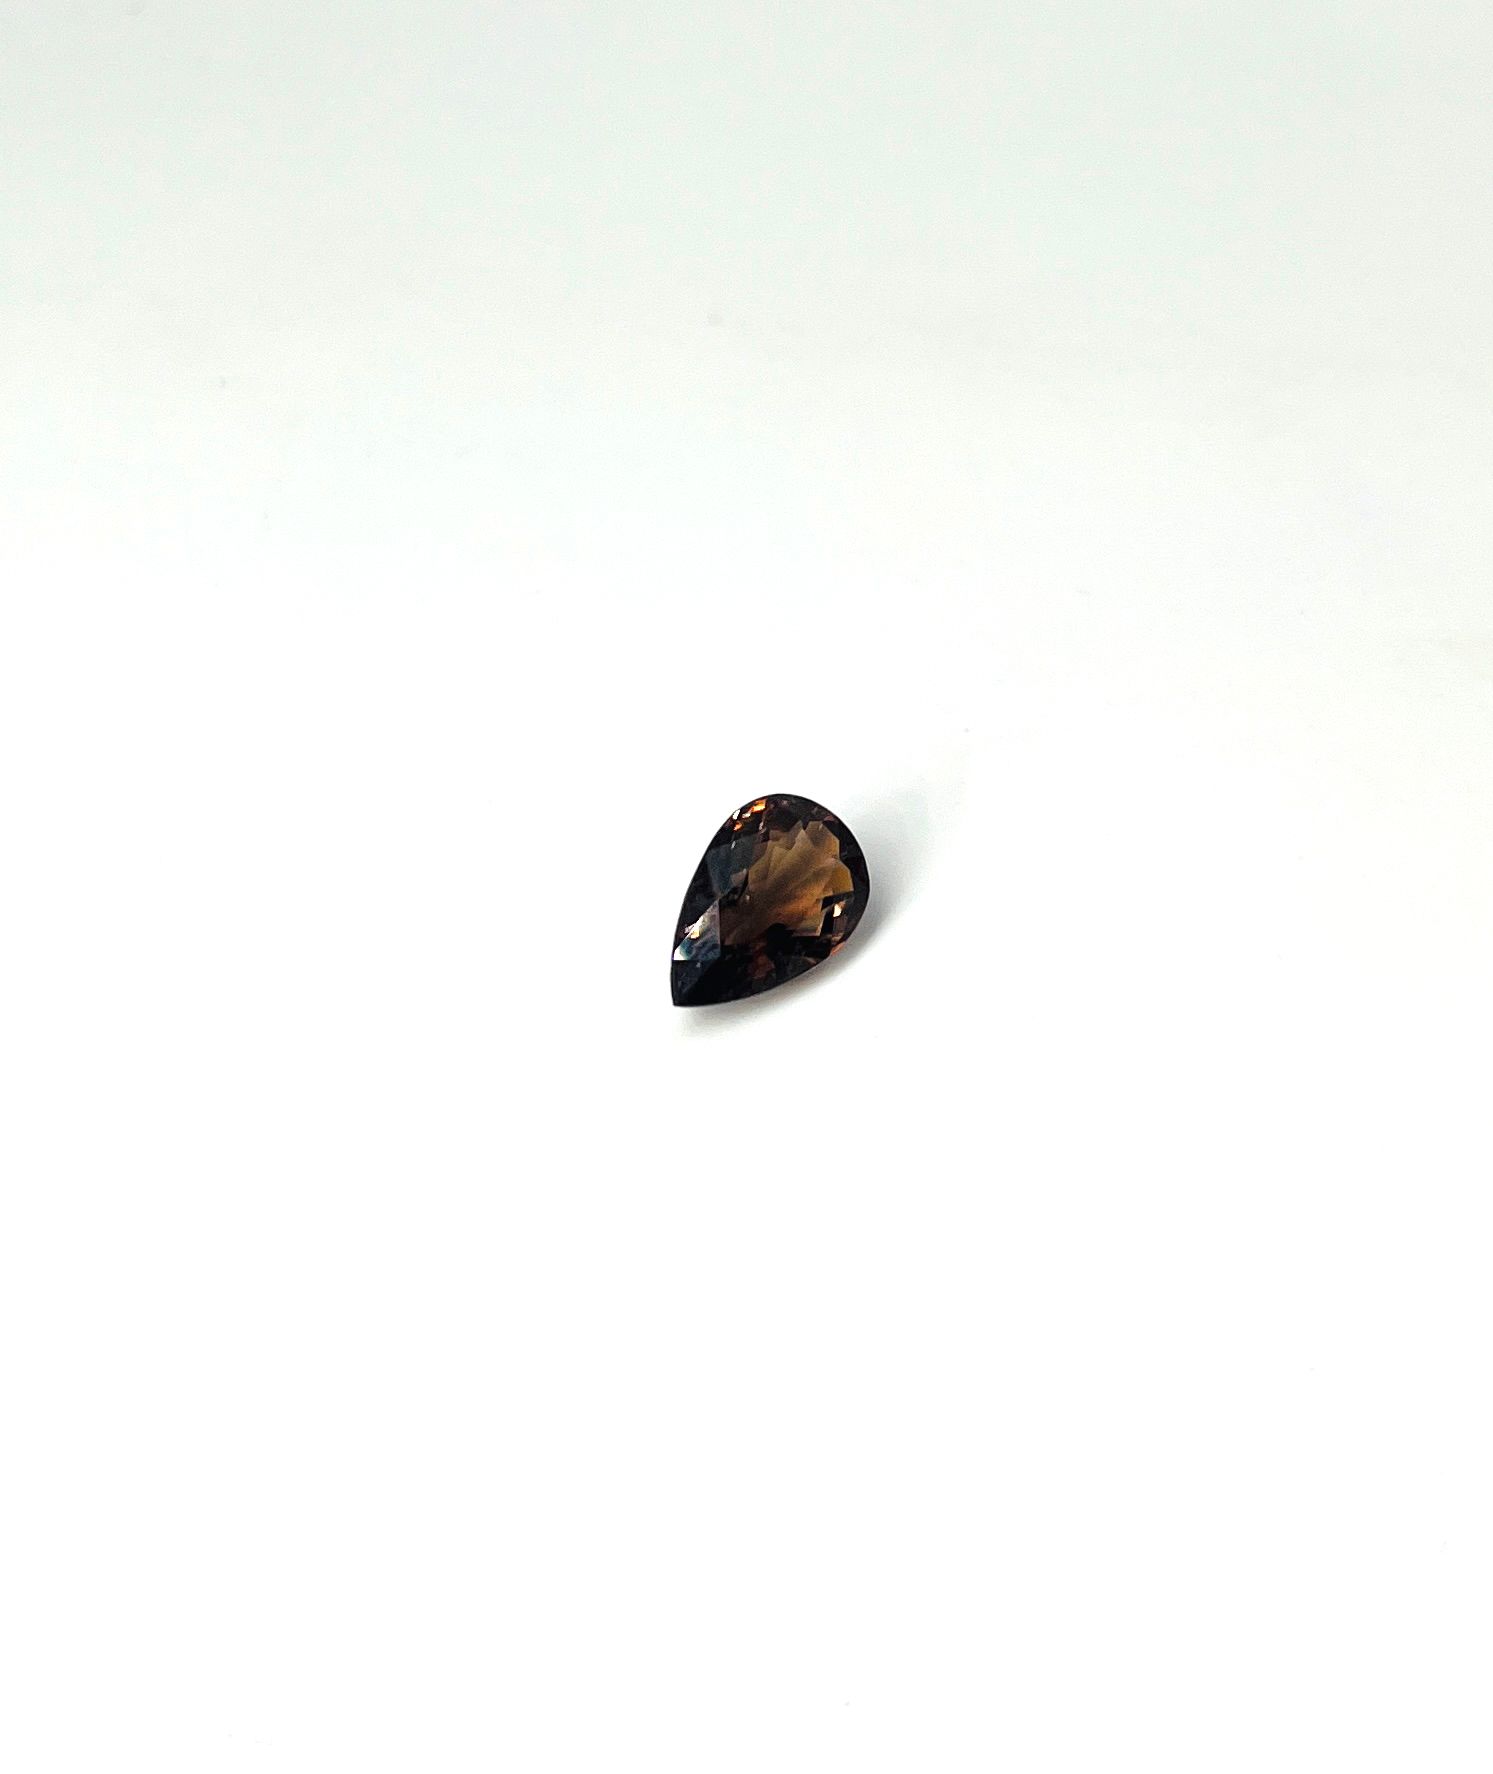 Null Pear cut tourmaline weighing 3.23 cts Dimensions: 0.8 x 1.2 cm